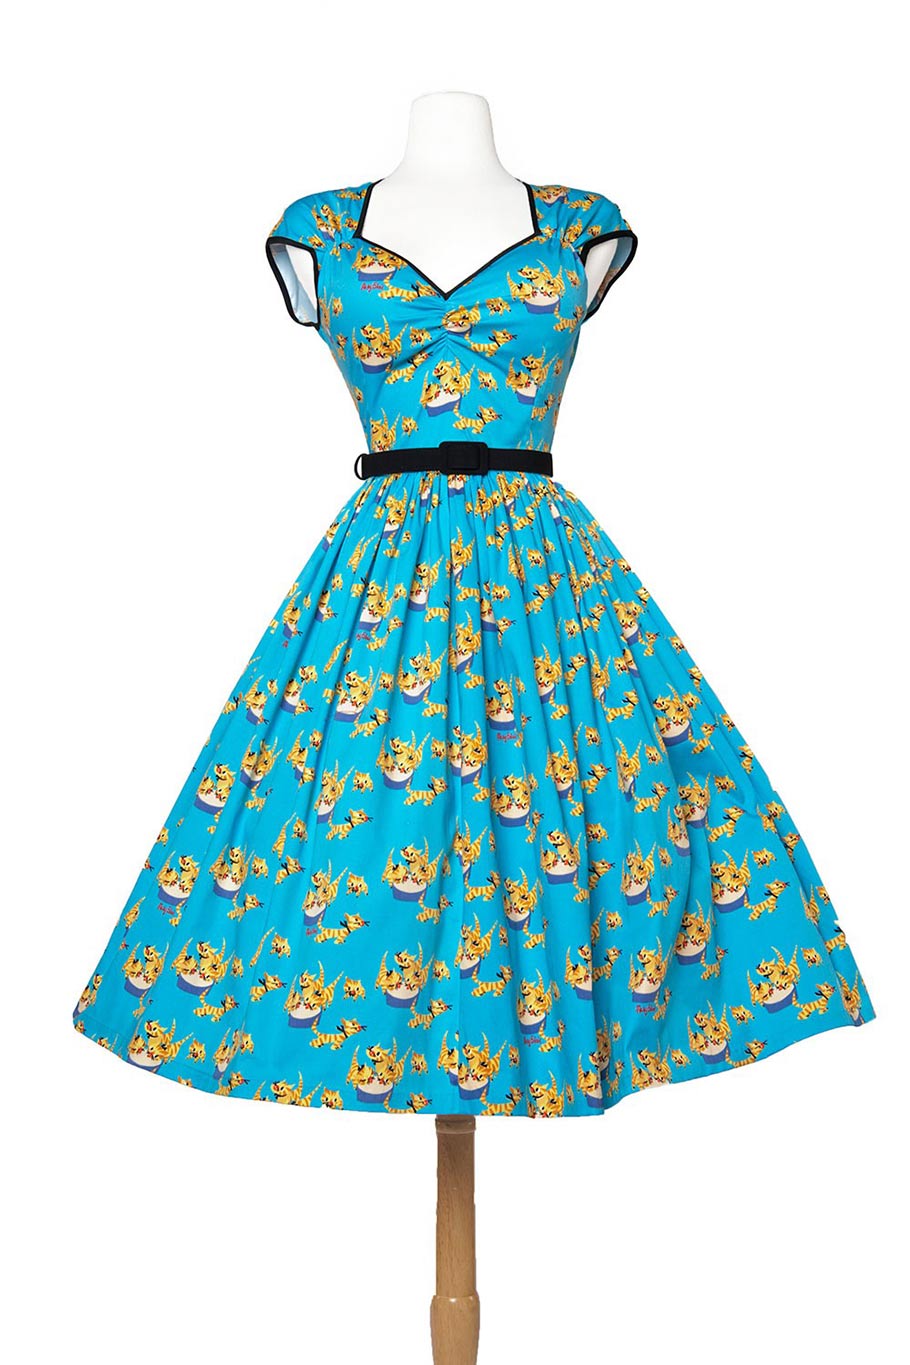 Heidi dress with gathered skirt in cat print. (Click to enlarge.)